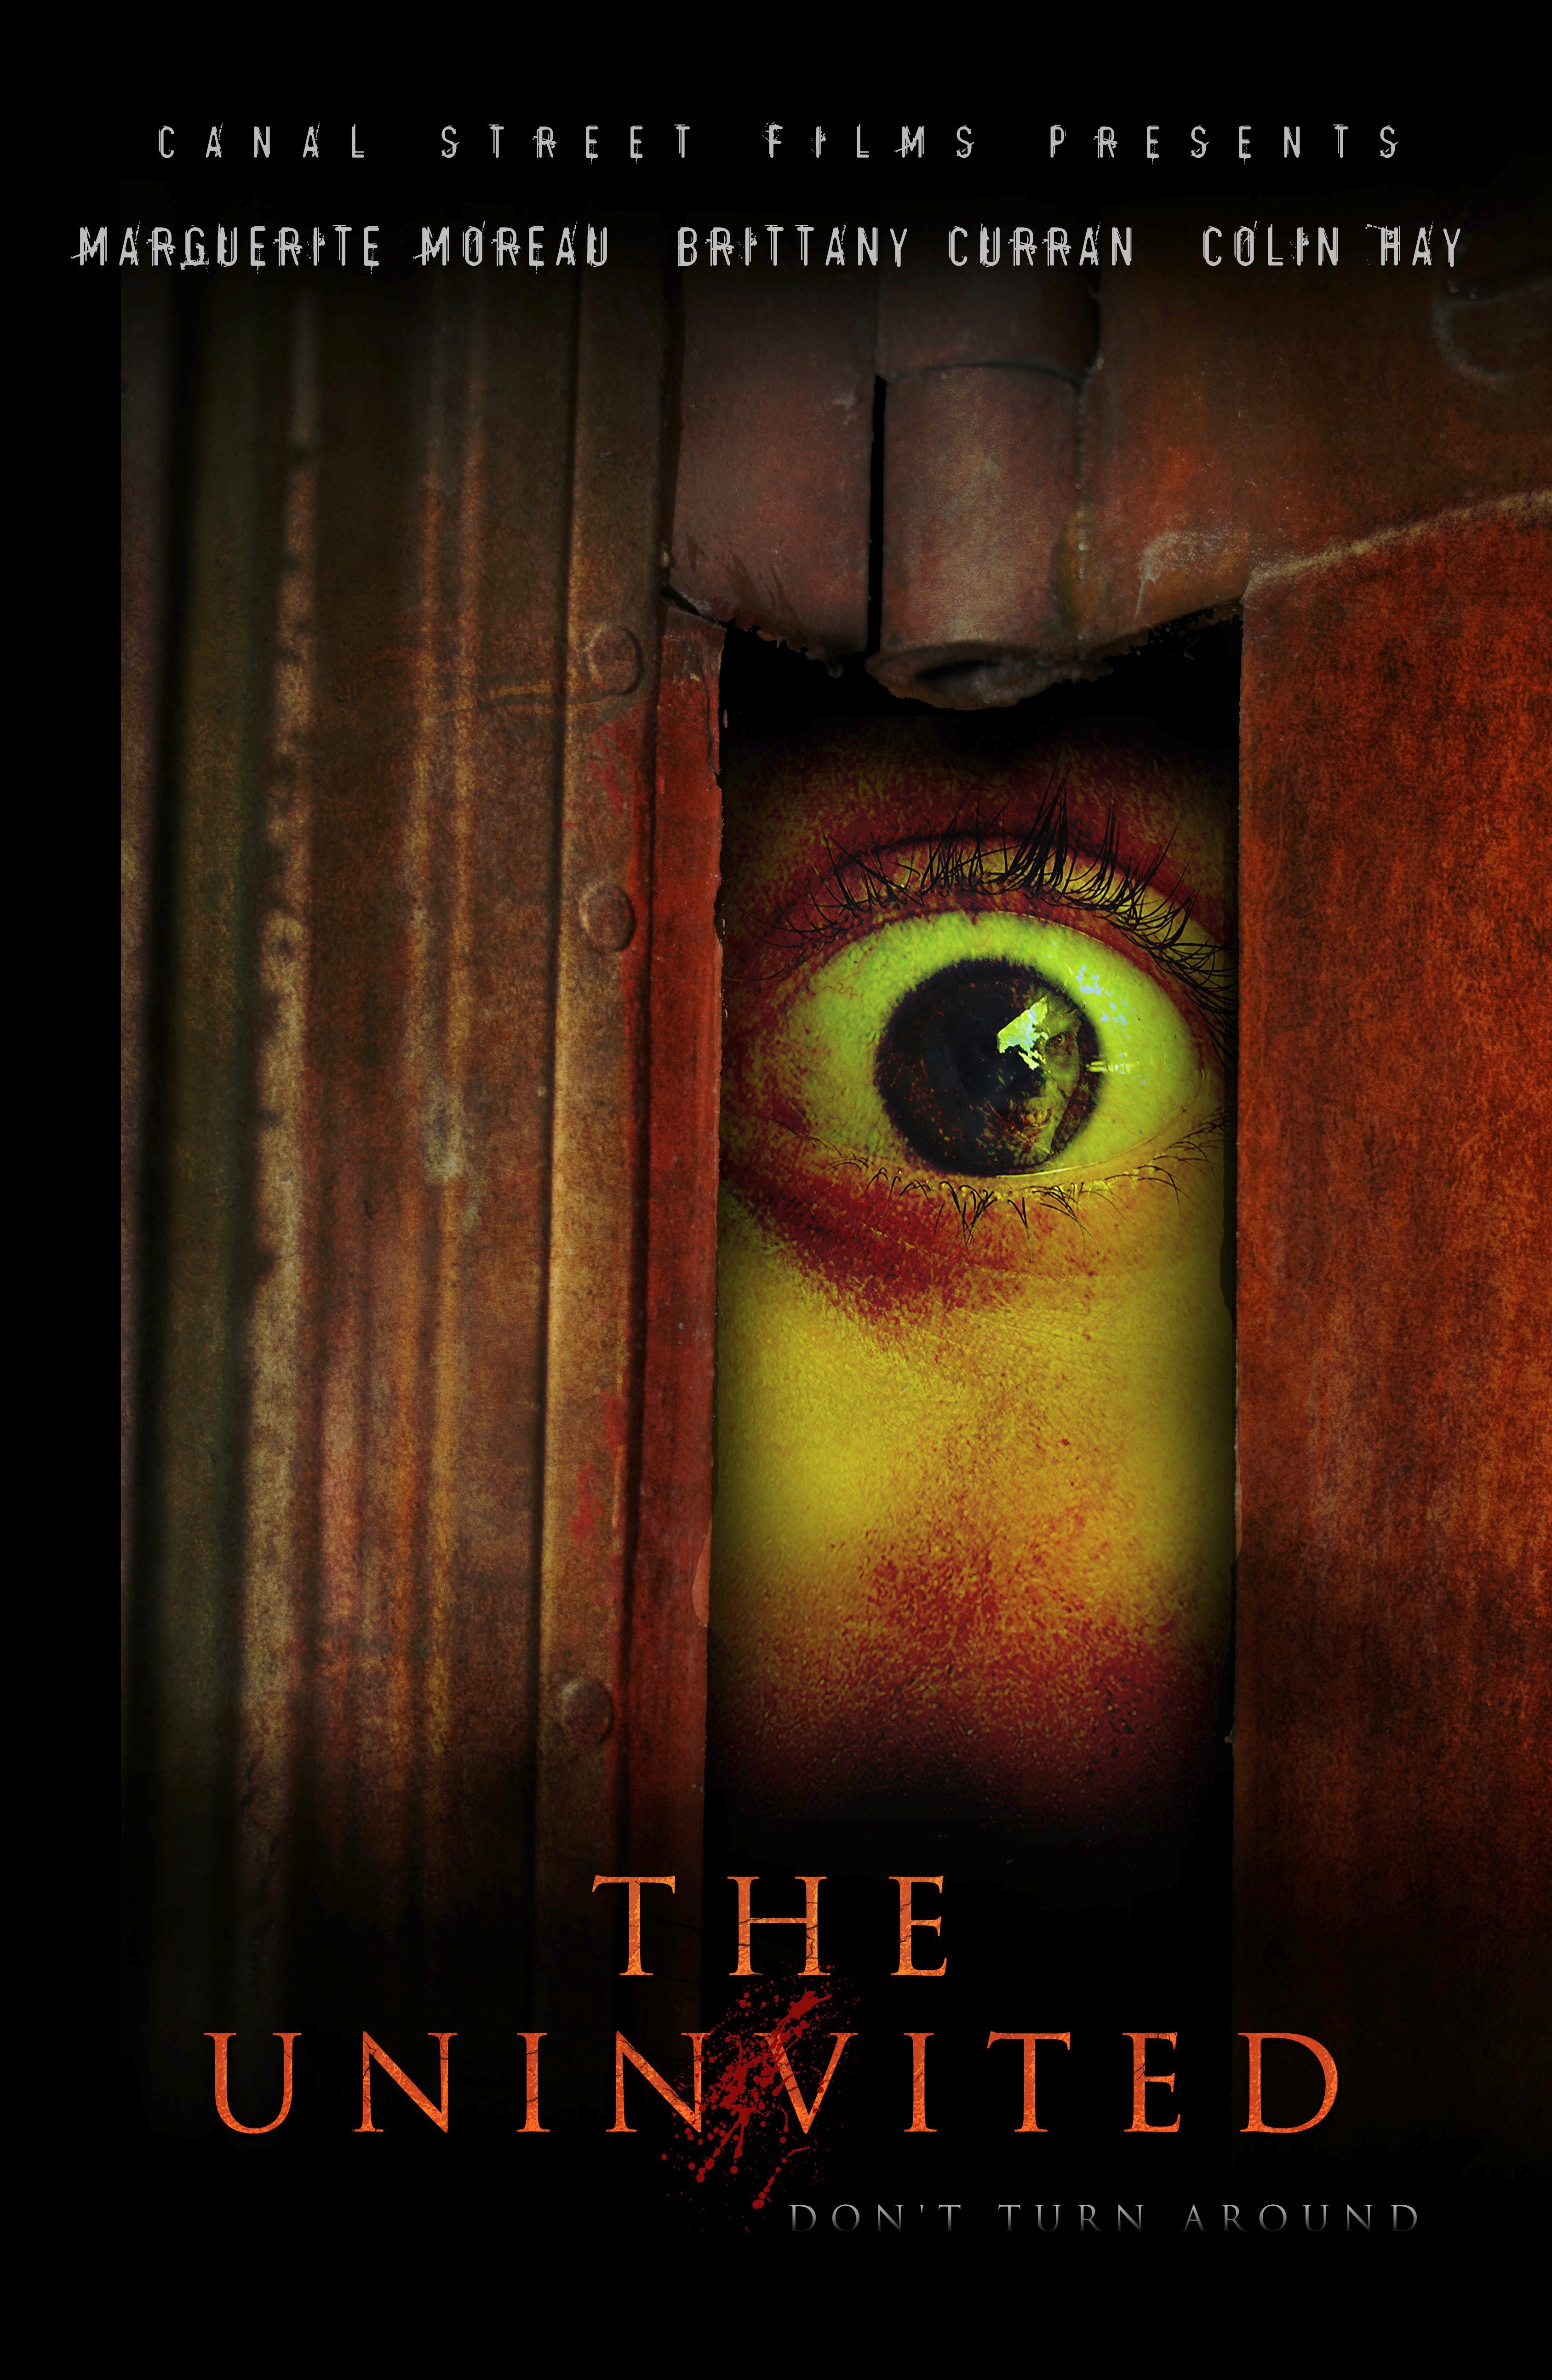 The Uninvited DVD Cover